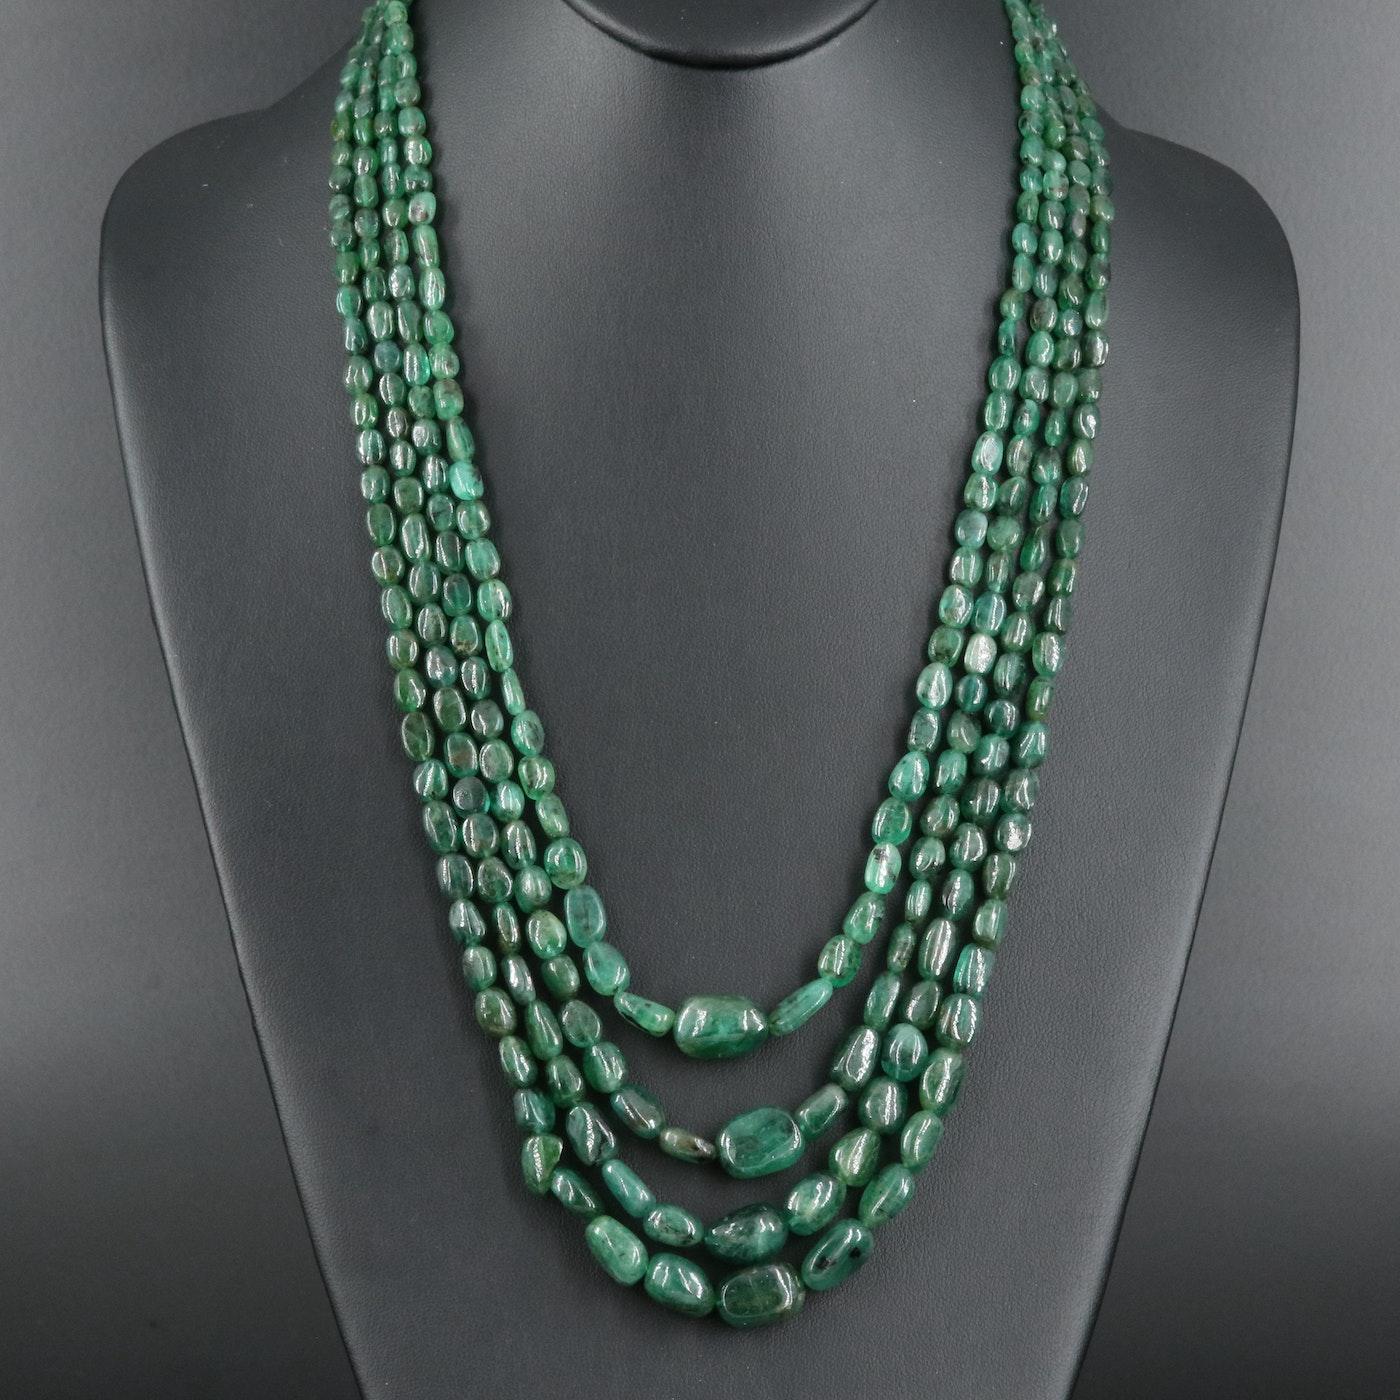 Mixed Cut 450 Carats of Earth Mined Emeralds Set in a 4 Strand Necklace For Sale